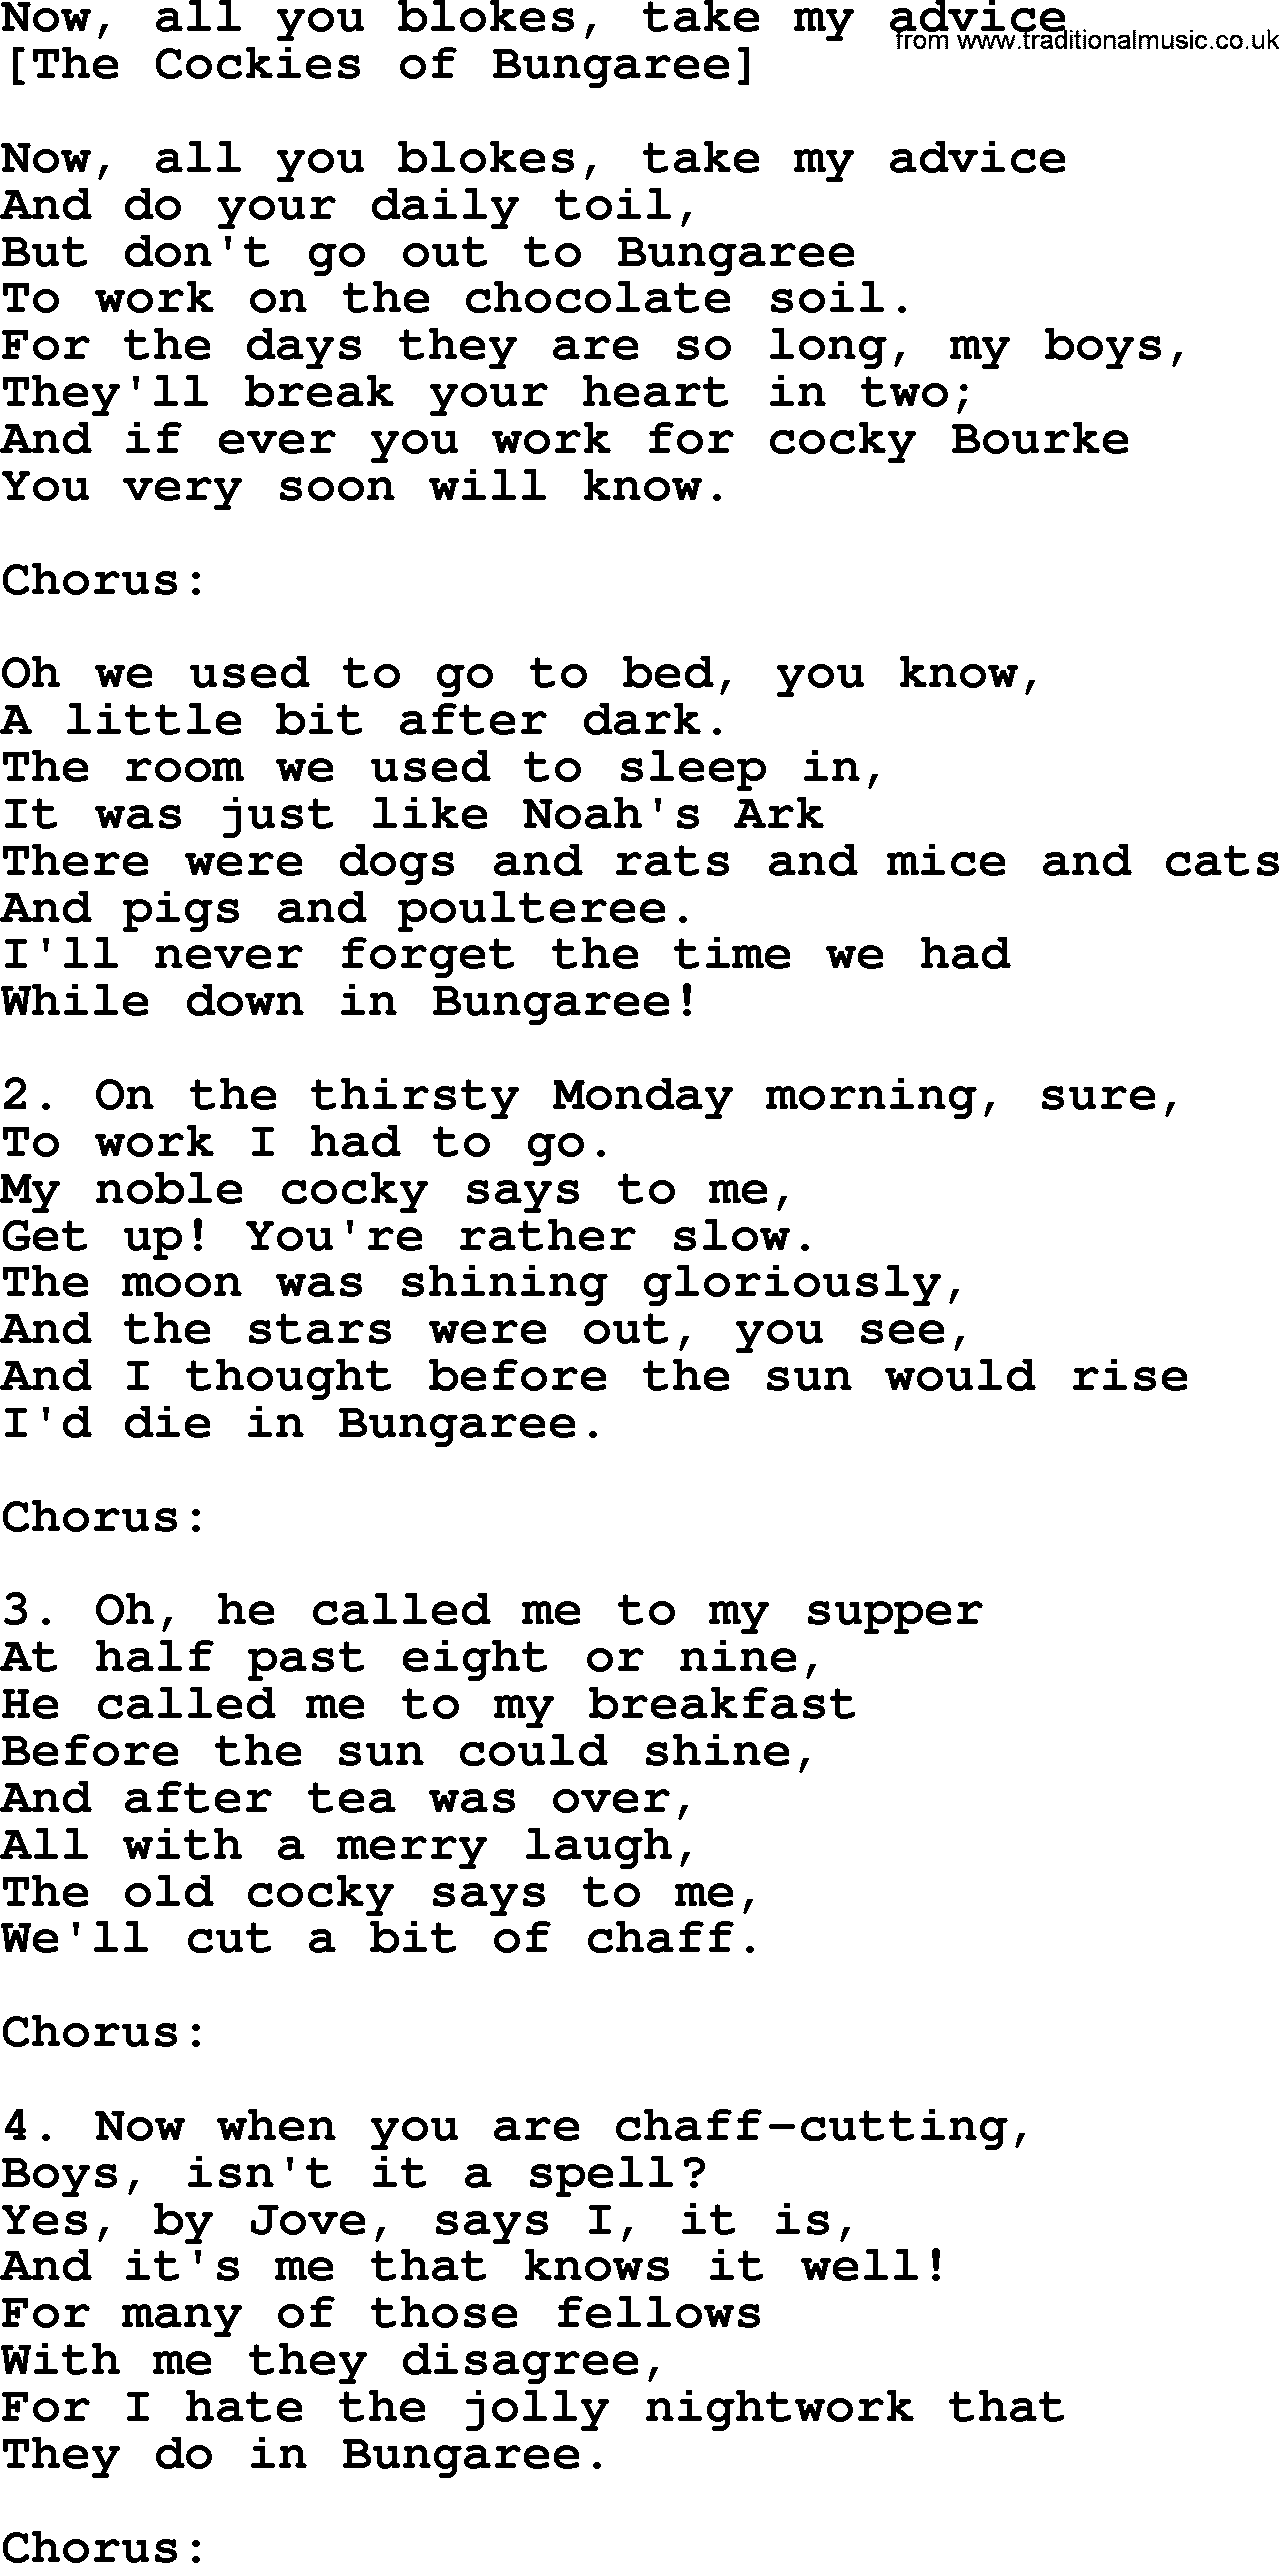 Old English Song: Now, All You Blokes, Take My Advice lyrics